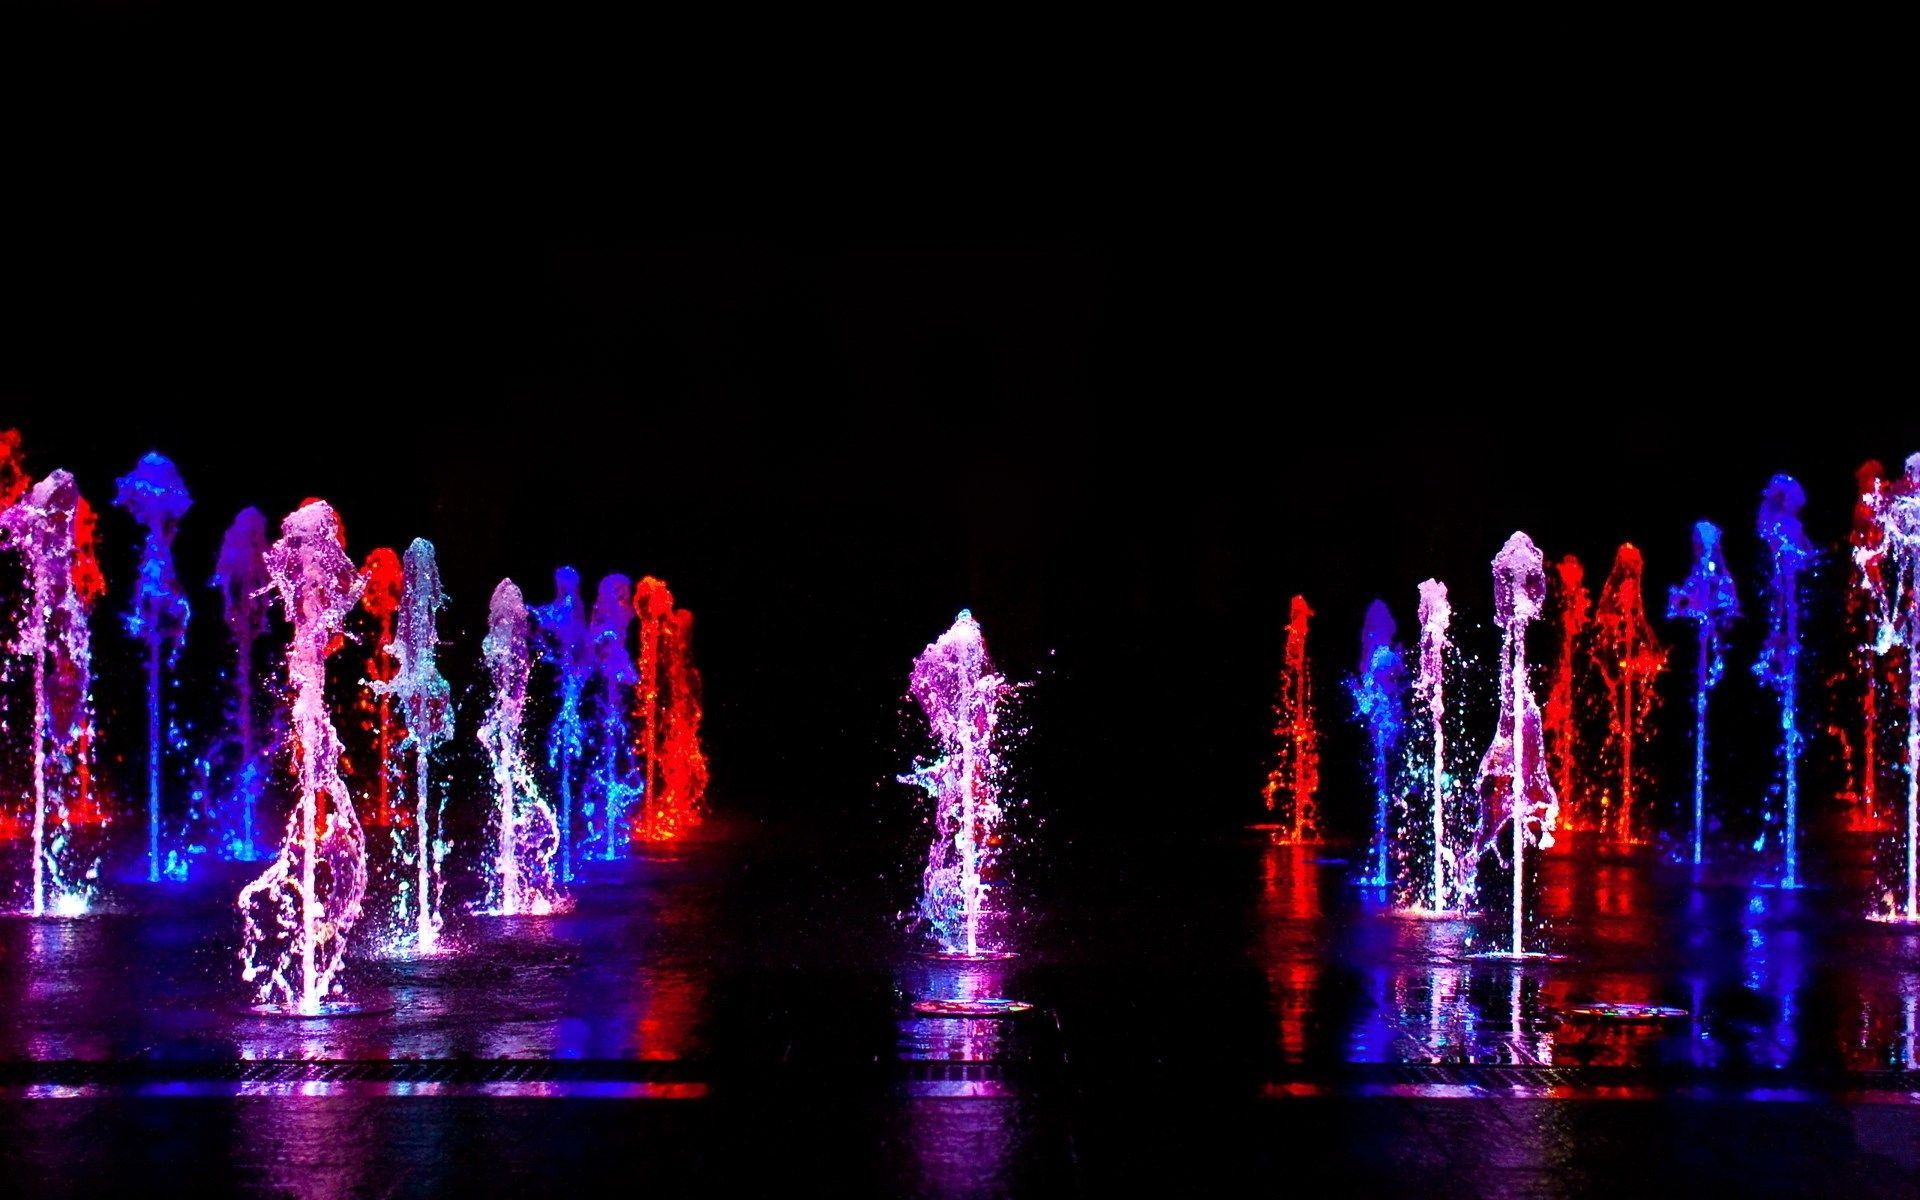 fountain image to download, 1920x1200 (340 kB). Beautiful wallpaper background, Fountains, Water art